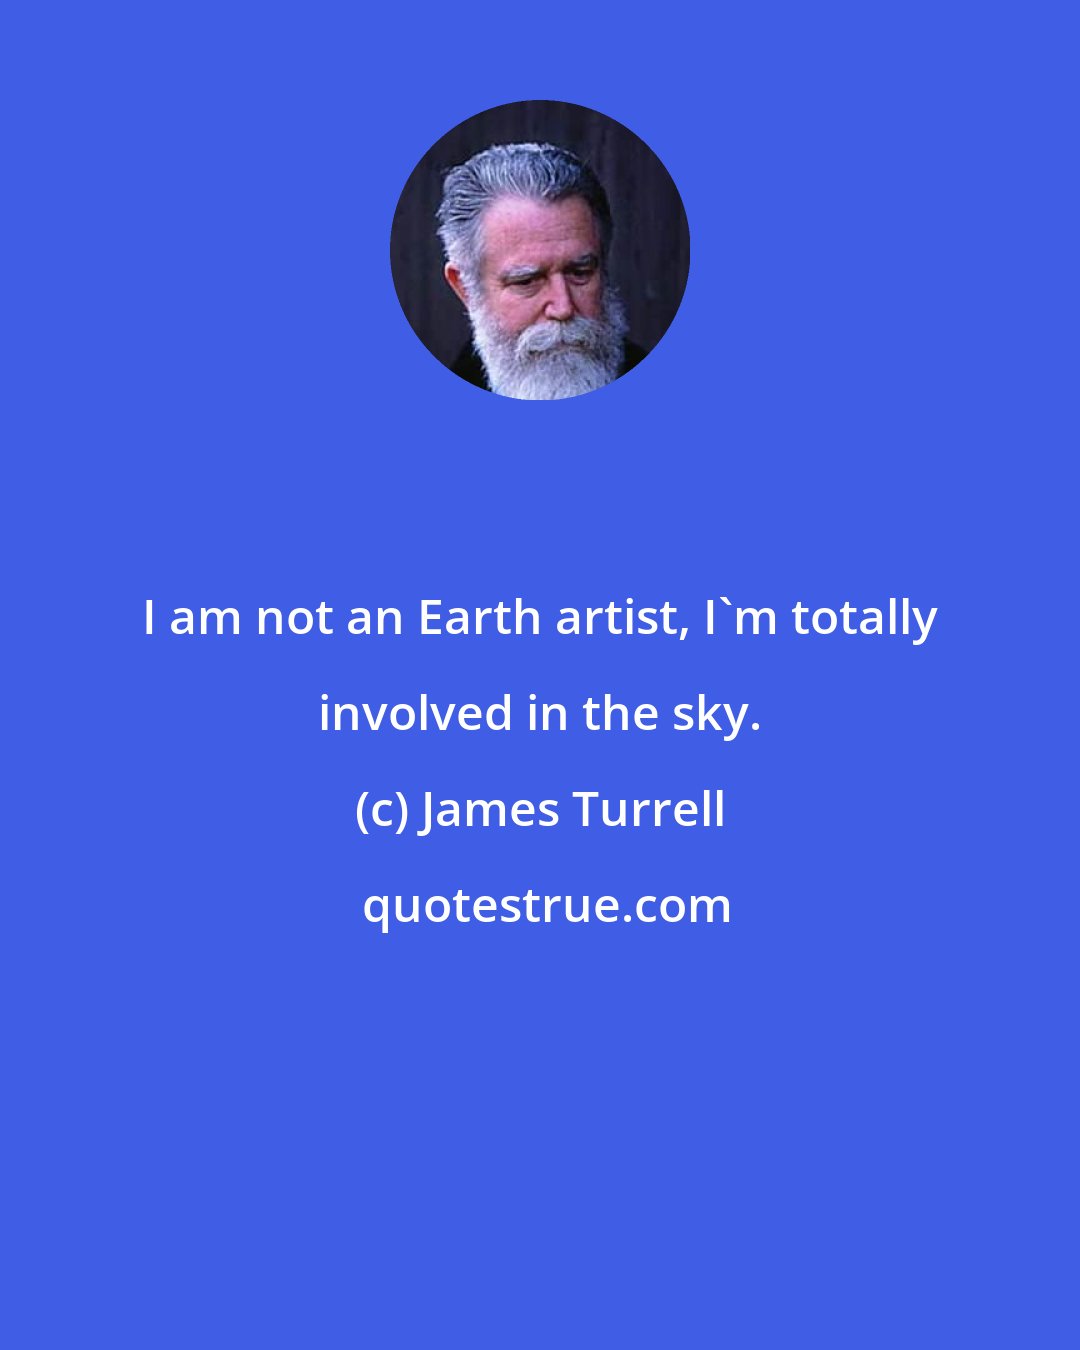 James Turrell: I am not an Earth artist, I'm totally involved in the sky.